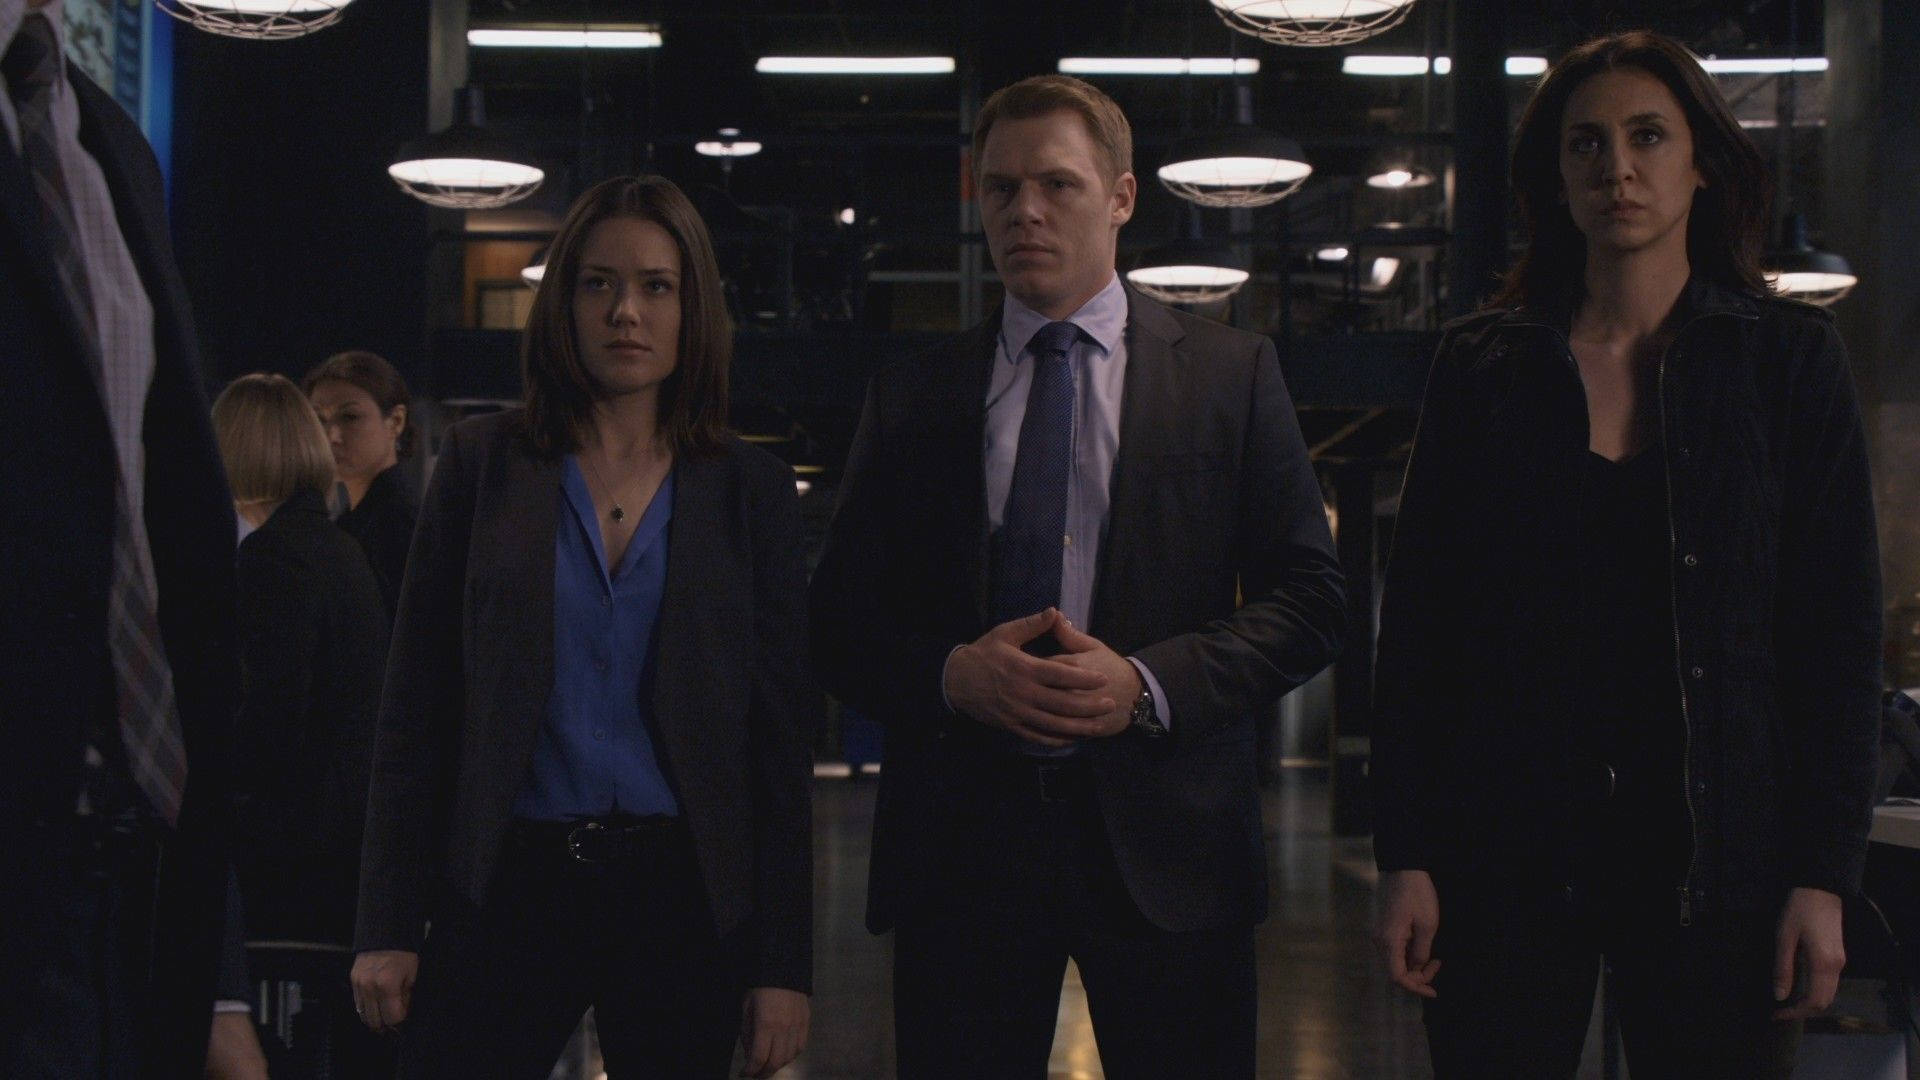 Fbi Agents On The Hunt In 'the Blacklist' Background